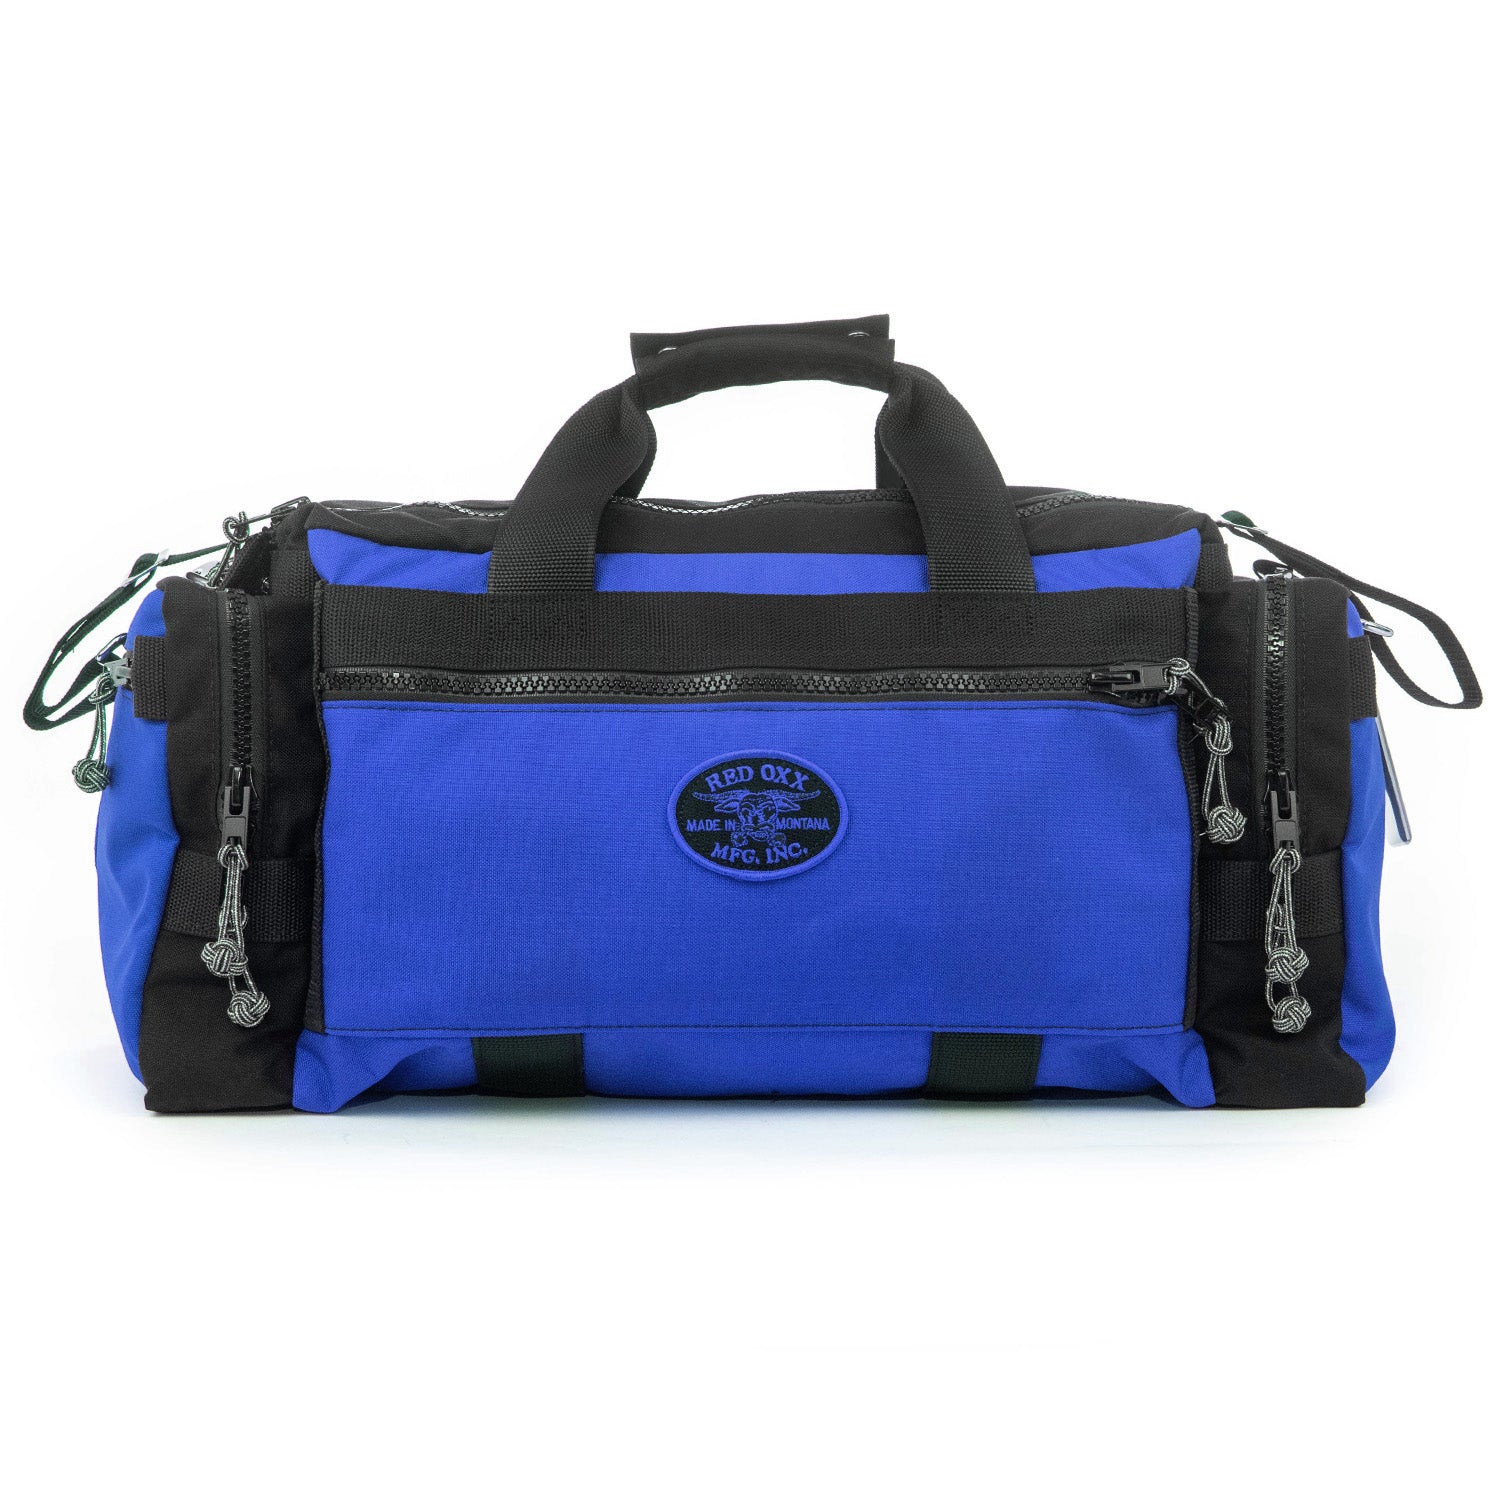 Front view of Pr 5 Safari Beano carry on bag.